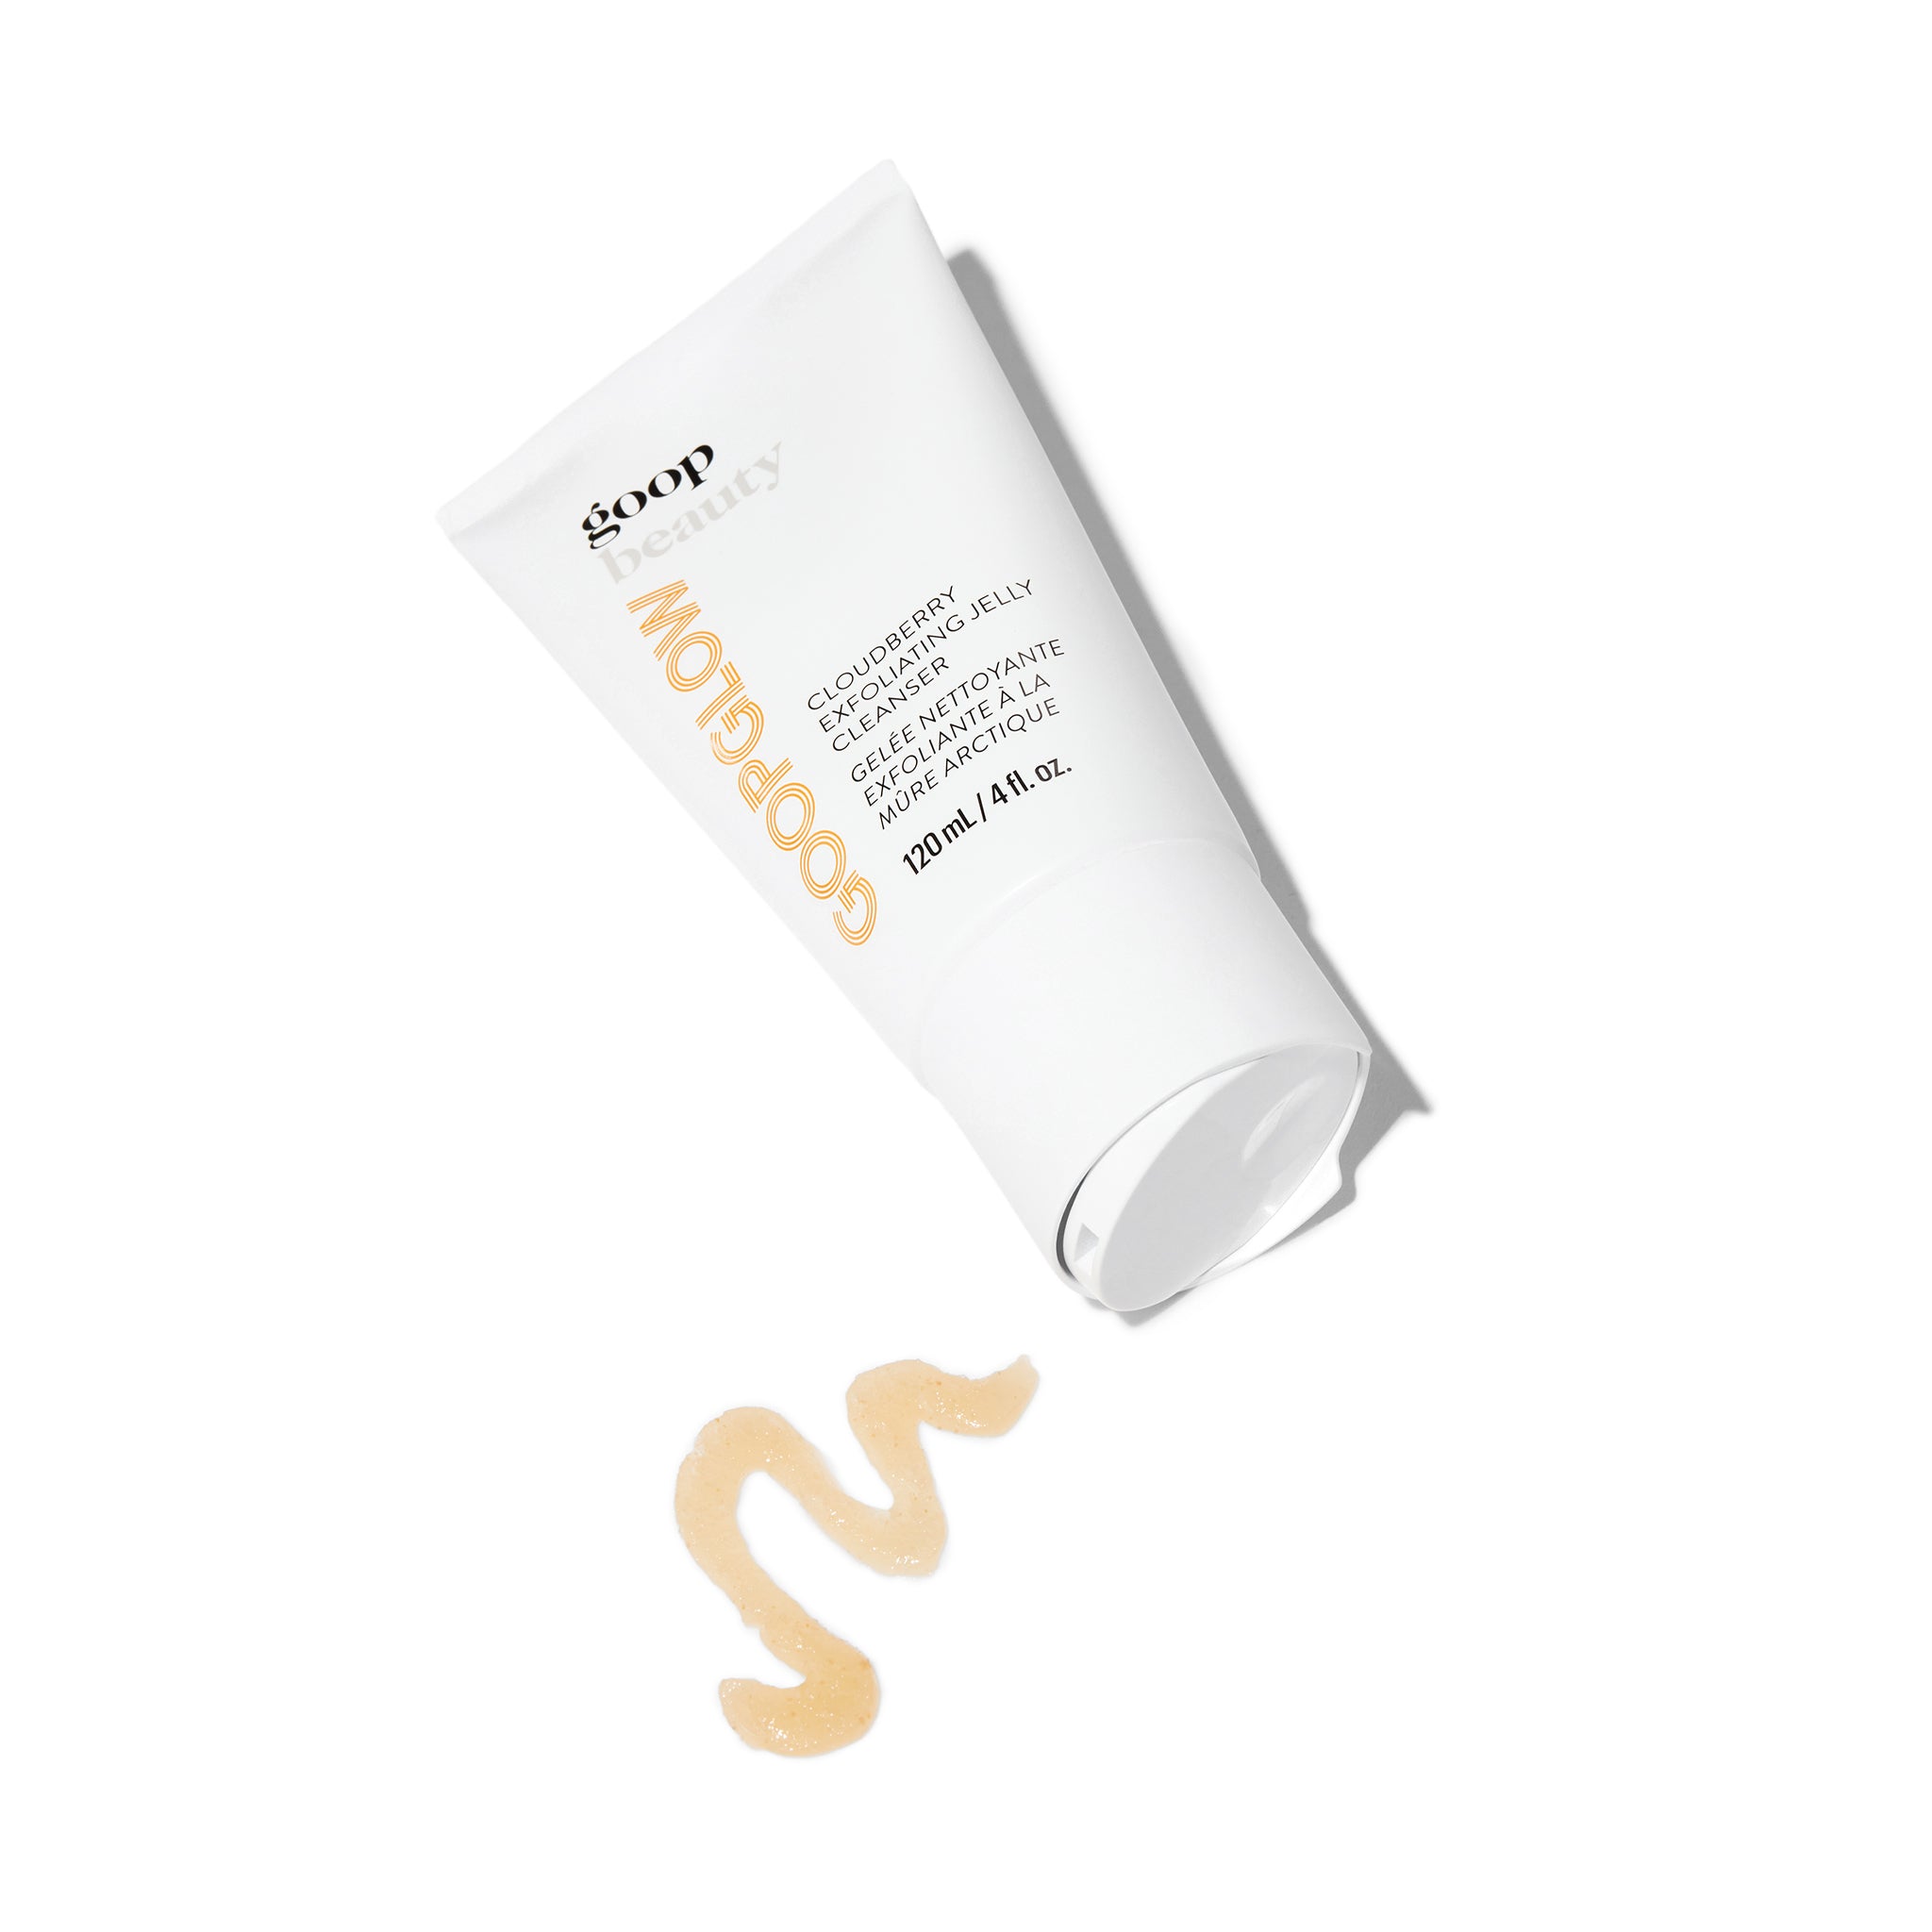 Goopglow Cloudberry Exfoliating Jelly Cleanser